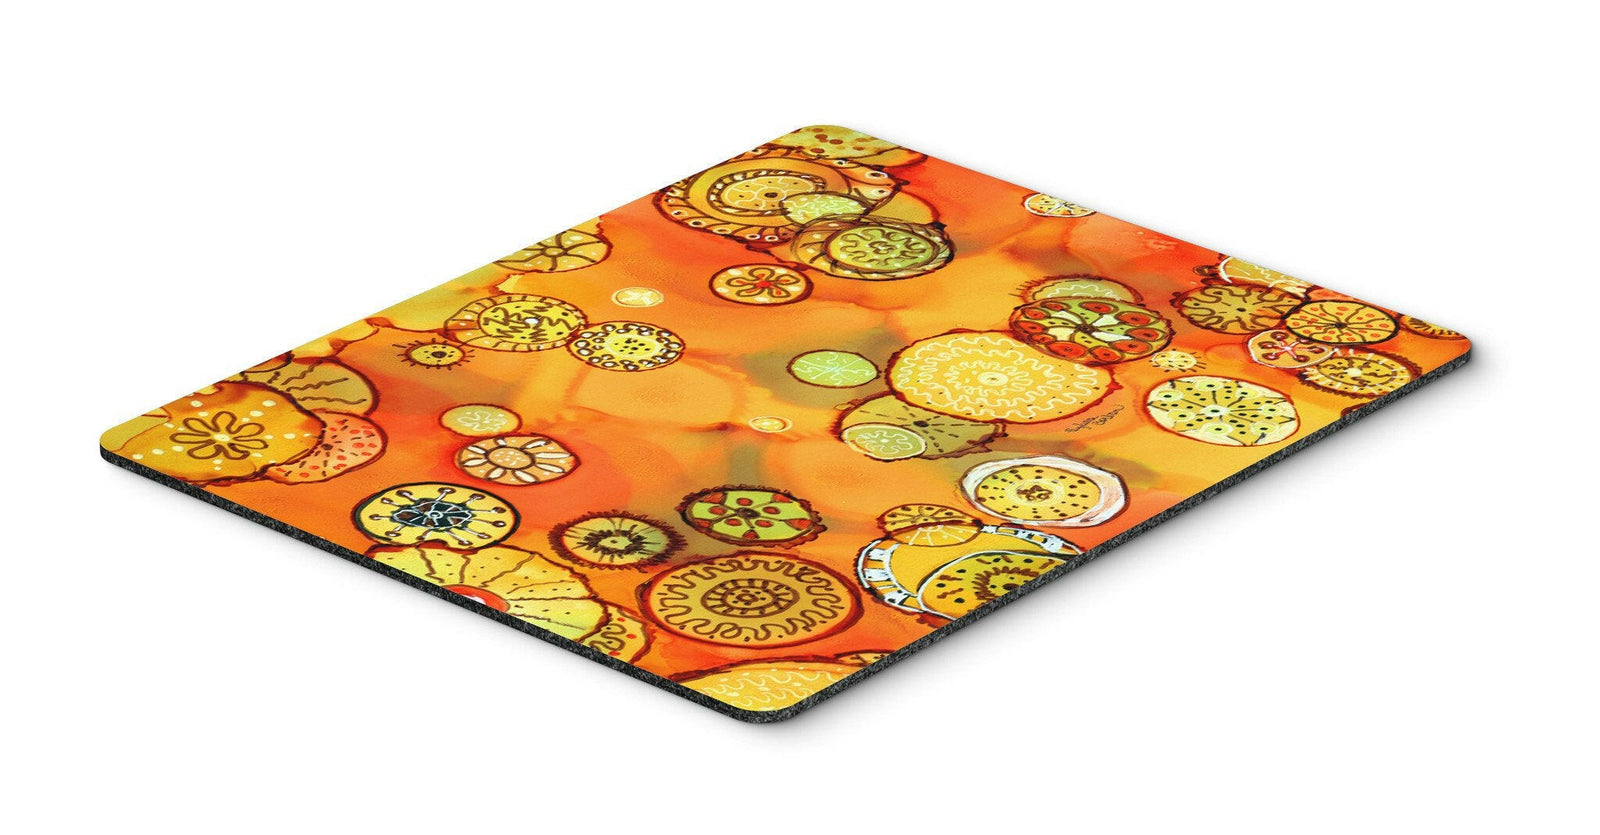 Abstract Flowers in Oranges and Yellows Mouse Pad, Hot Pad or Trivet 8987MP by Caroline's Treasures